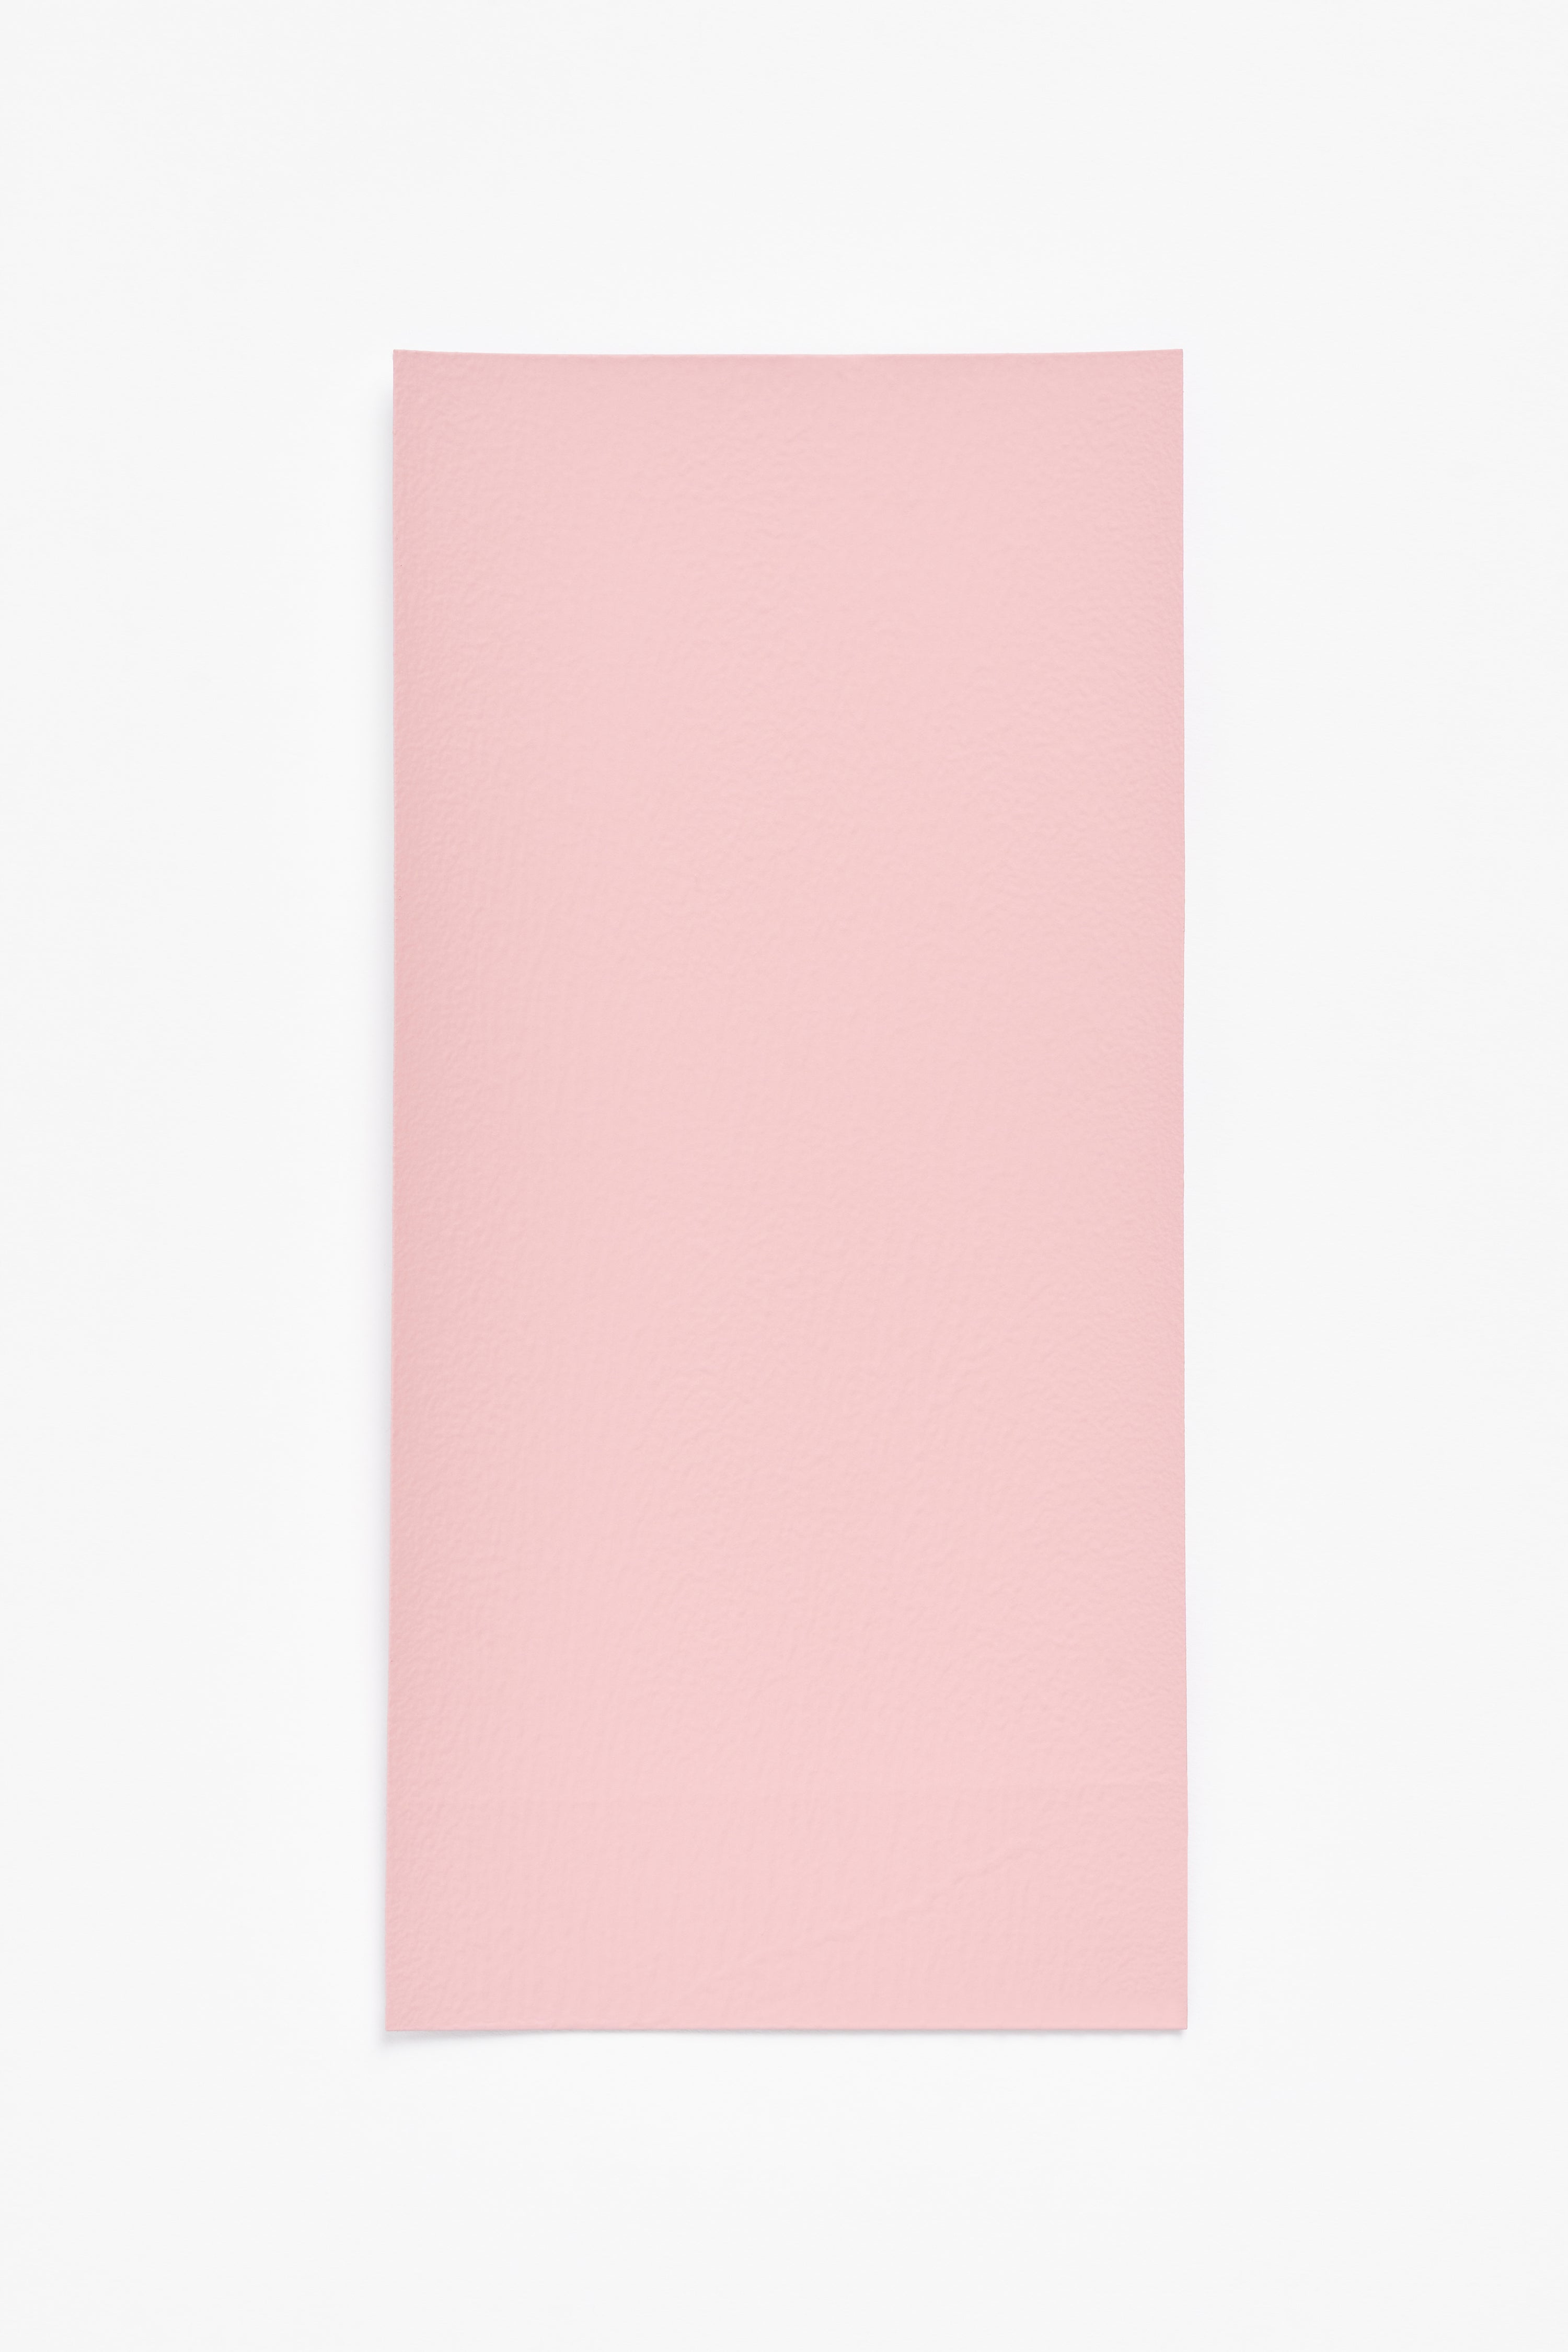 Blush — a paint colour developed by Halleroed for Blēo